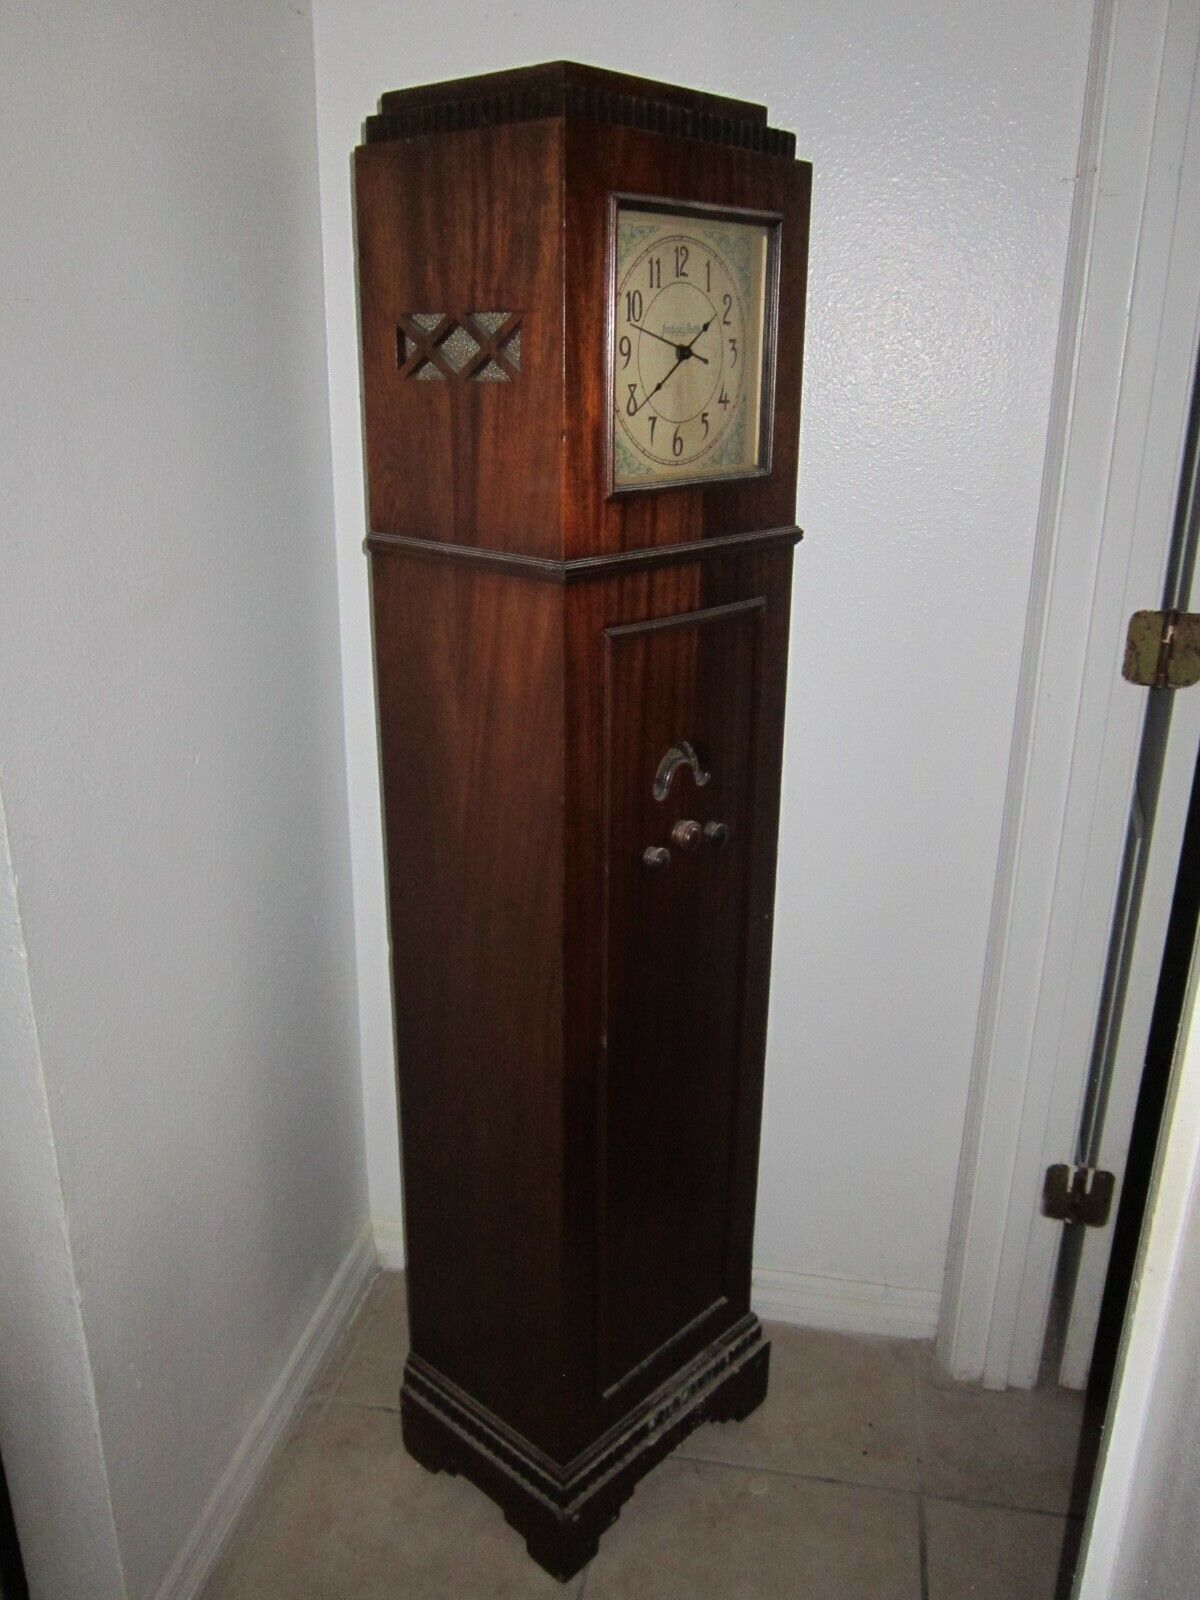 Jackson Bell 8 Tube Grandfather Clock Deco Radio May Not Fully Functional Parts 